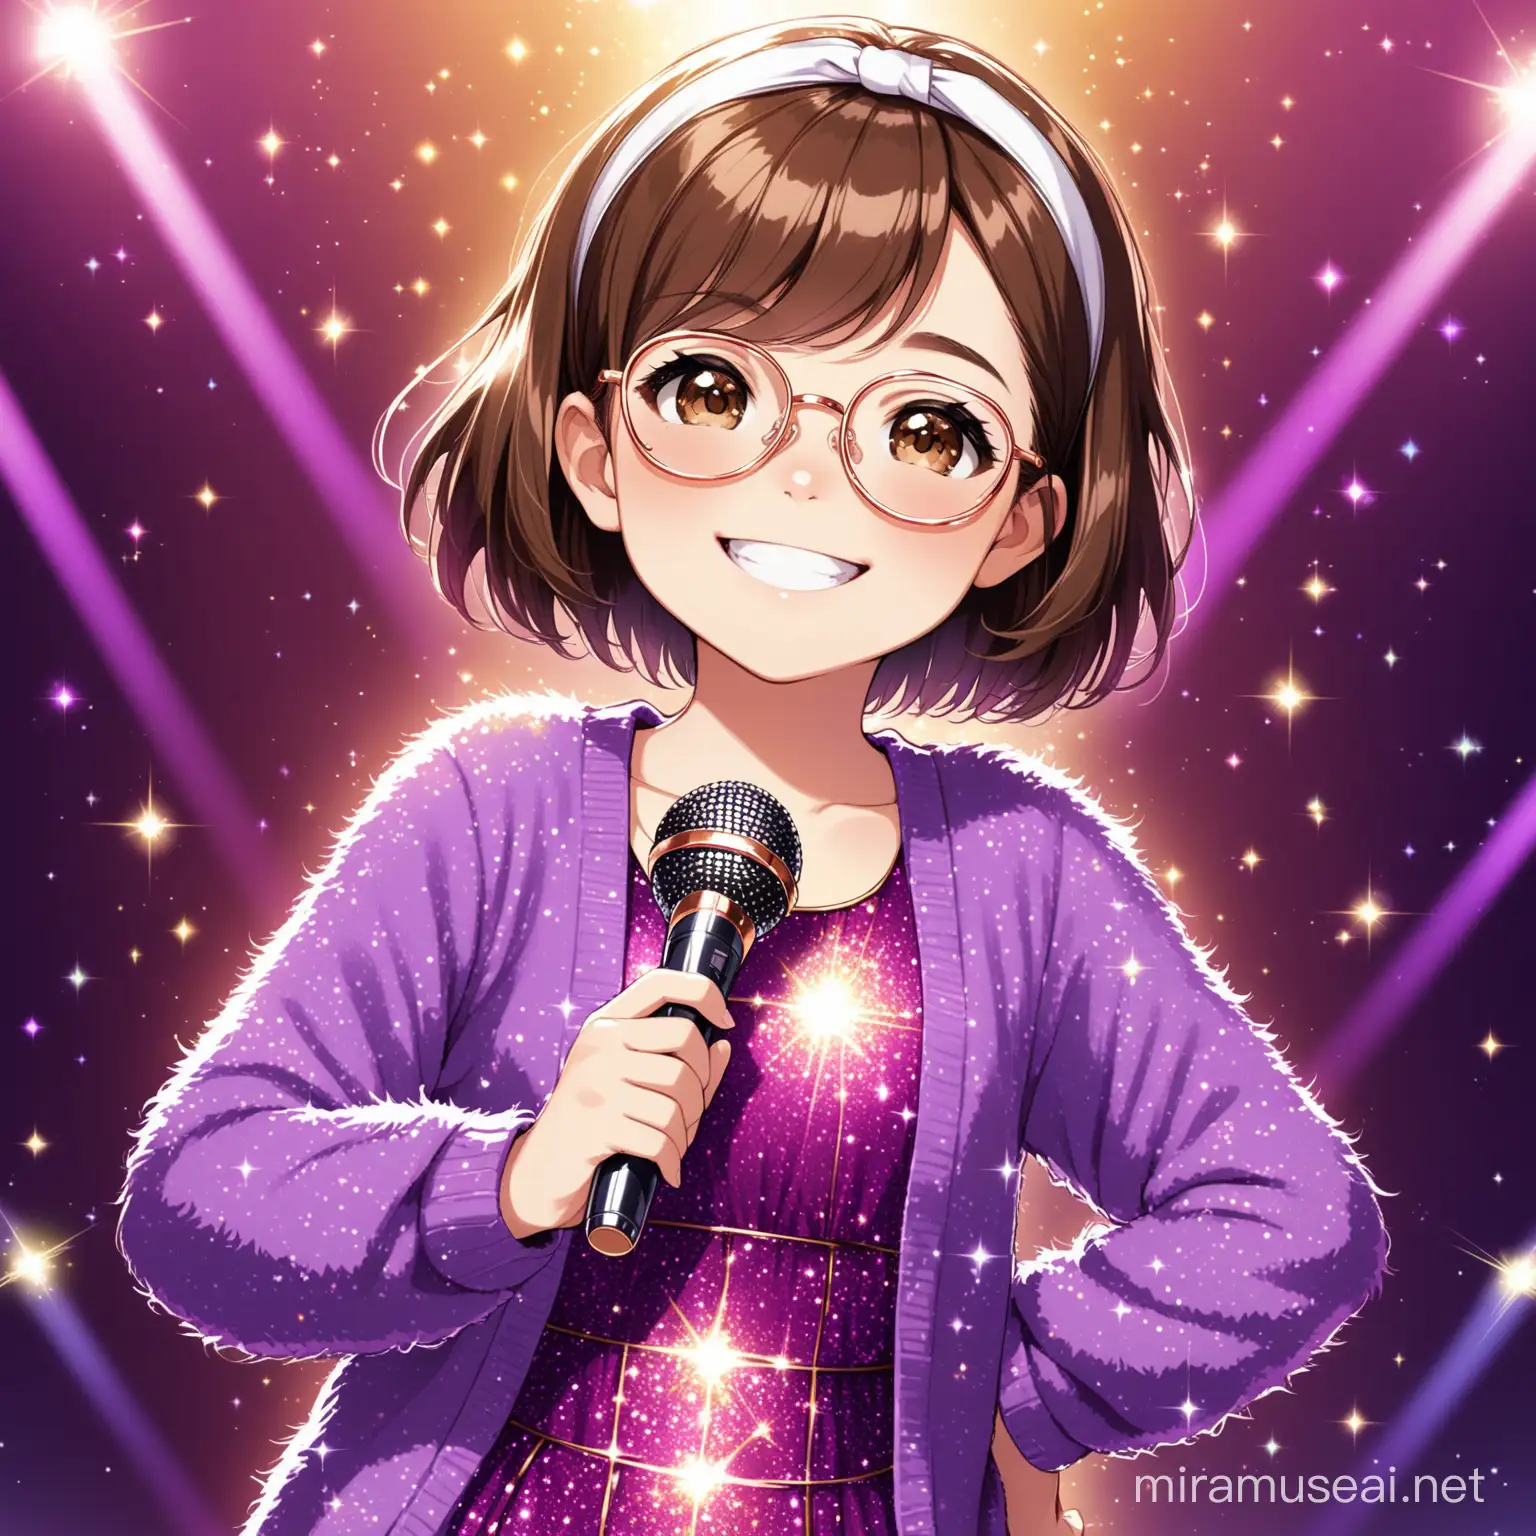 Smiling Girl in Glittery Purple Dress Holding Sparkly Microphone